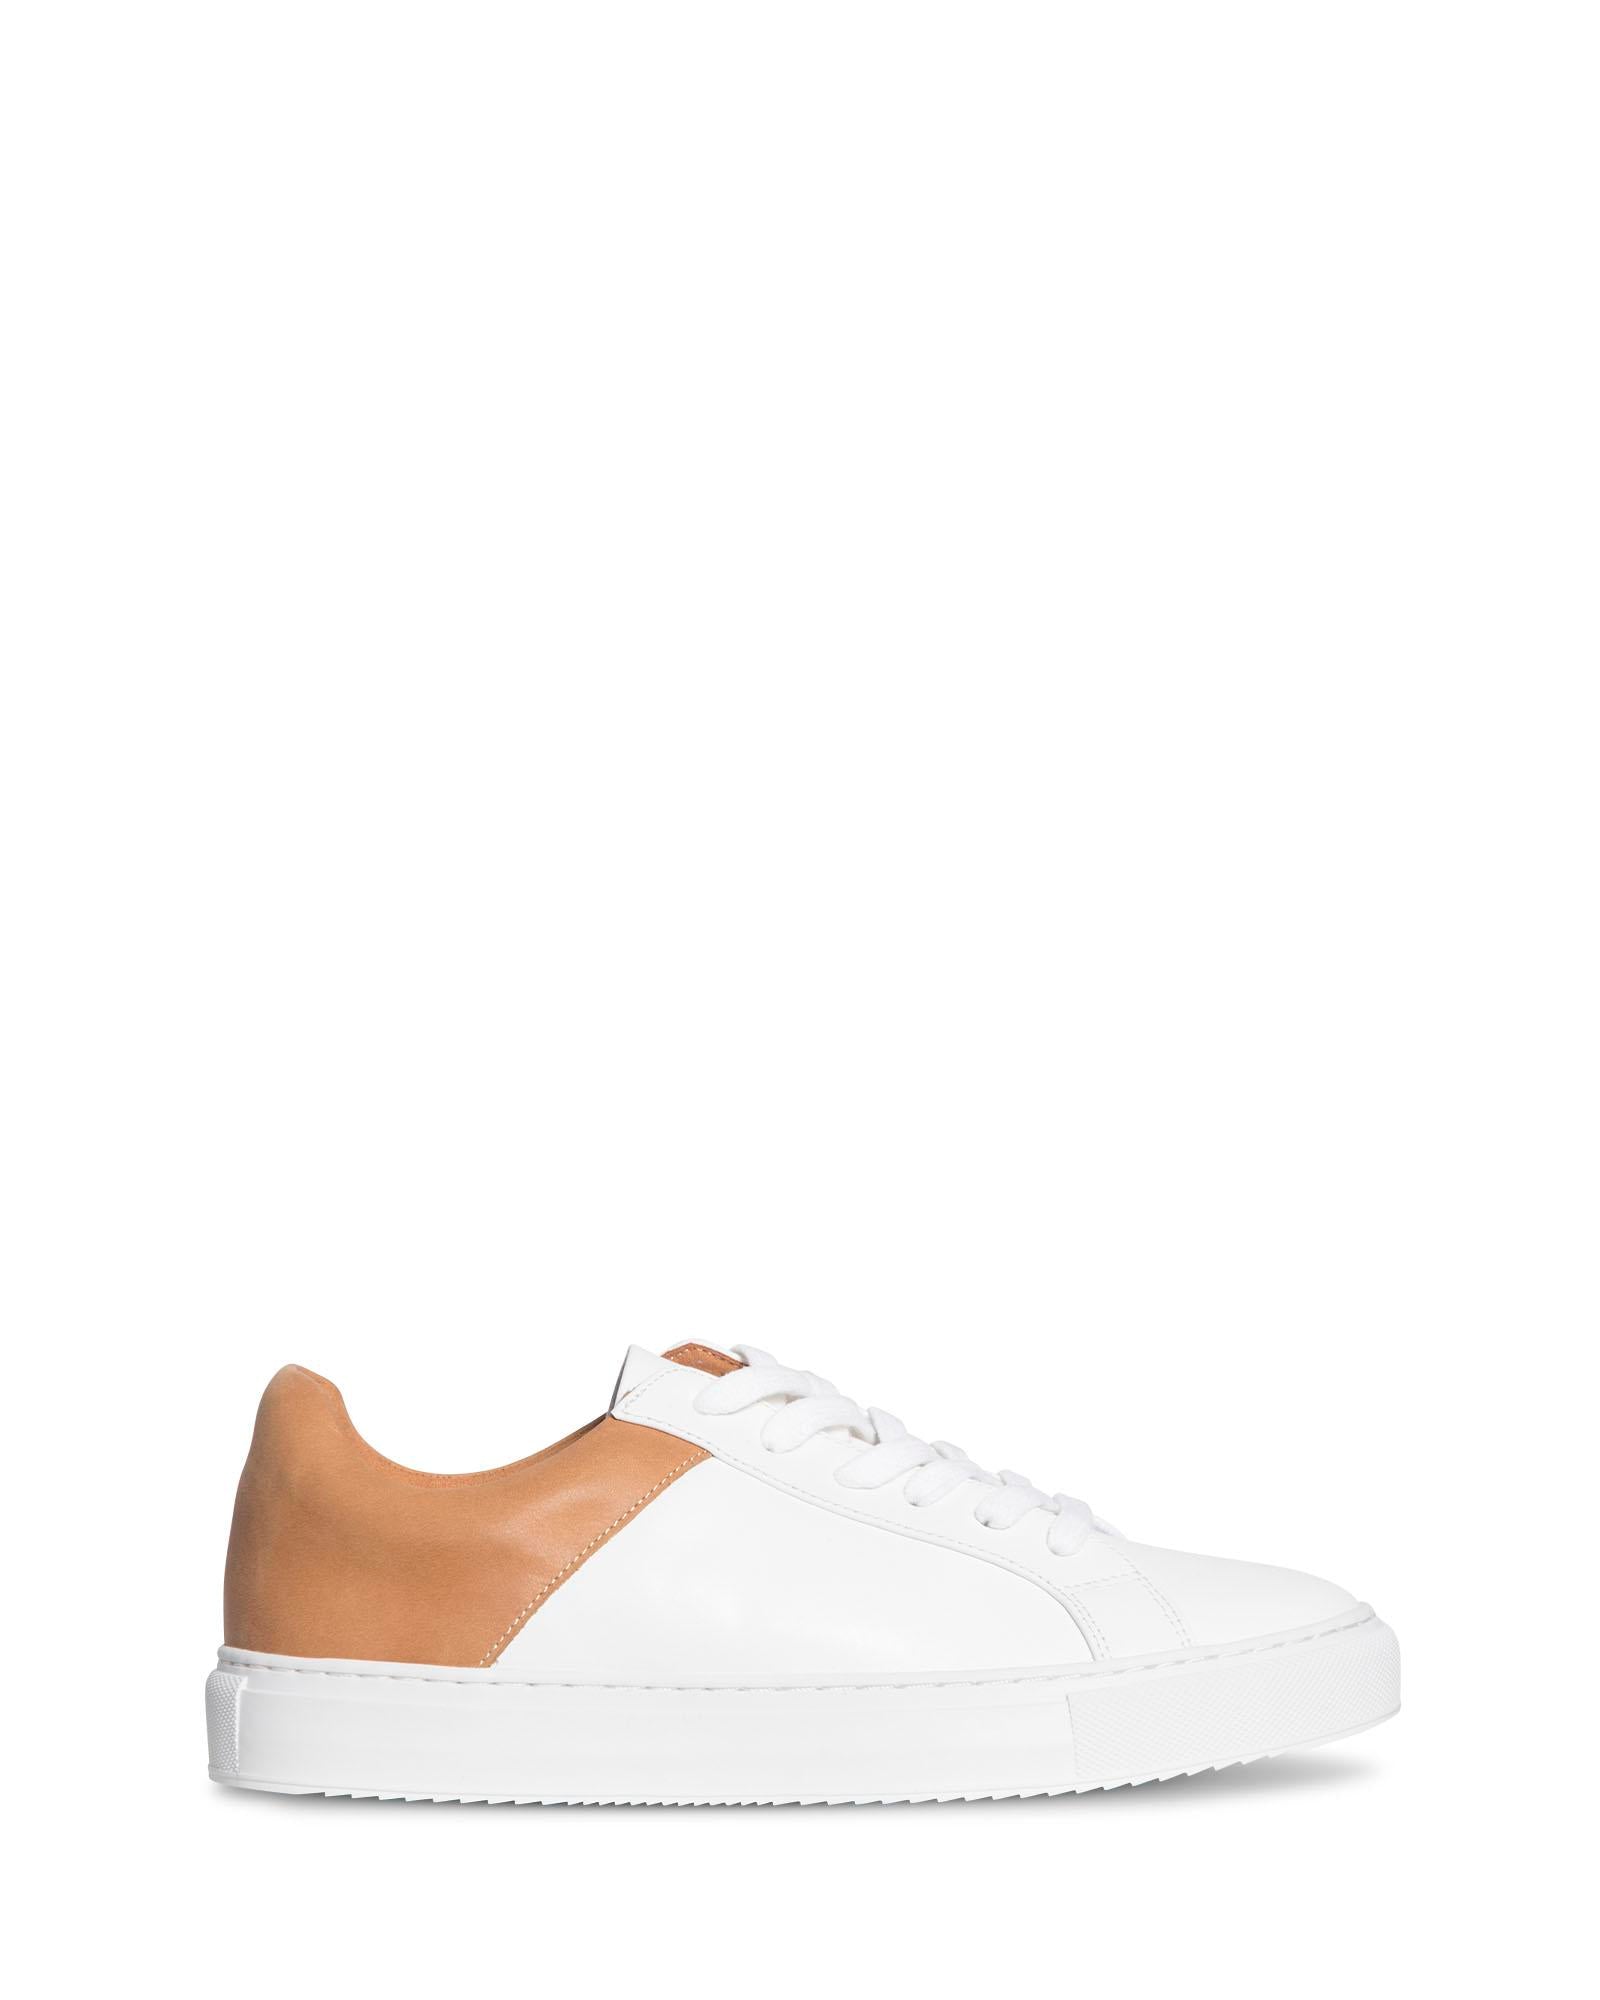 Ariana White/Tan 2.5cm Sole Sneaker with Laces 